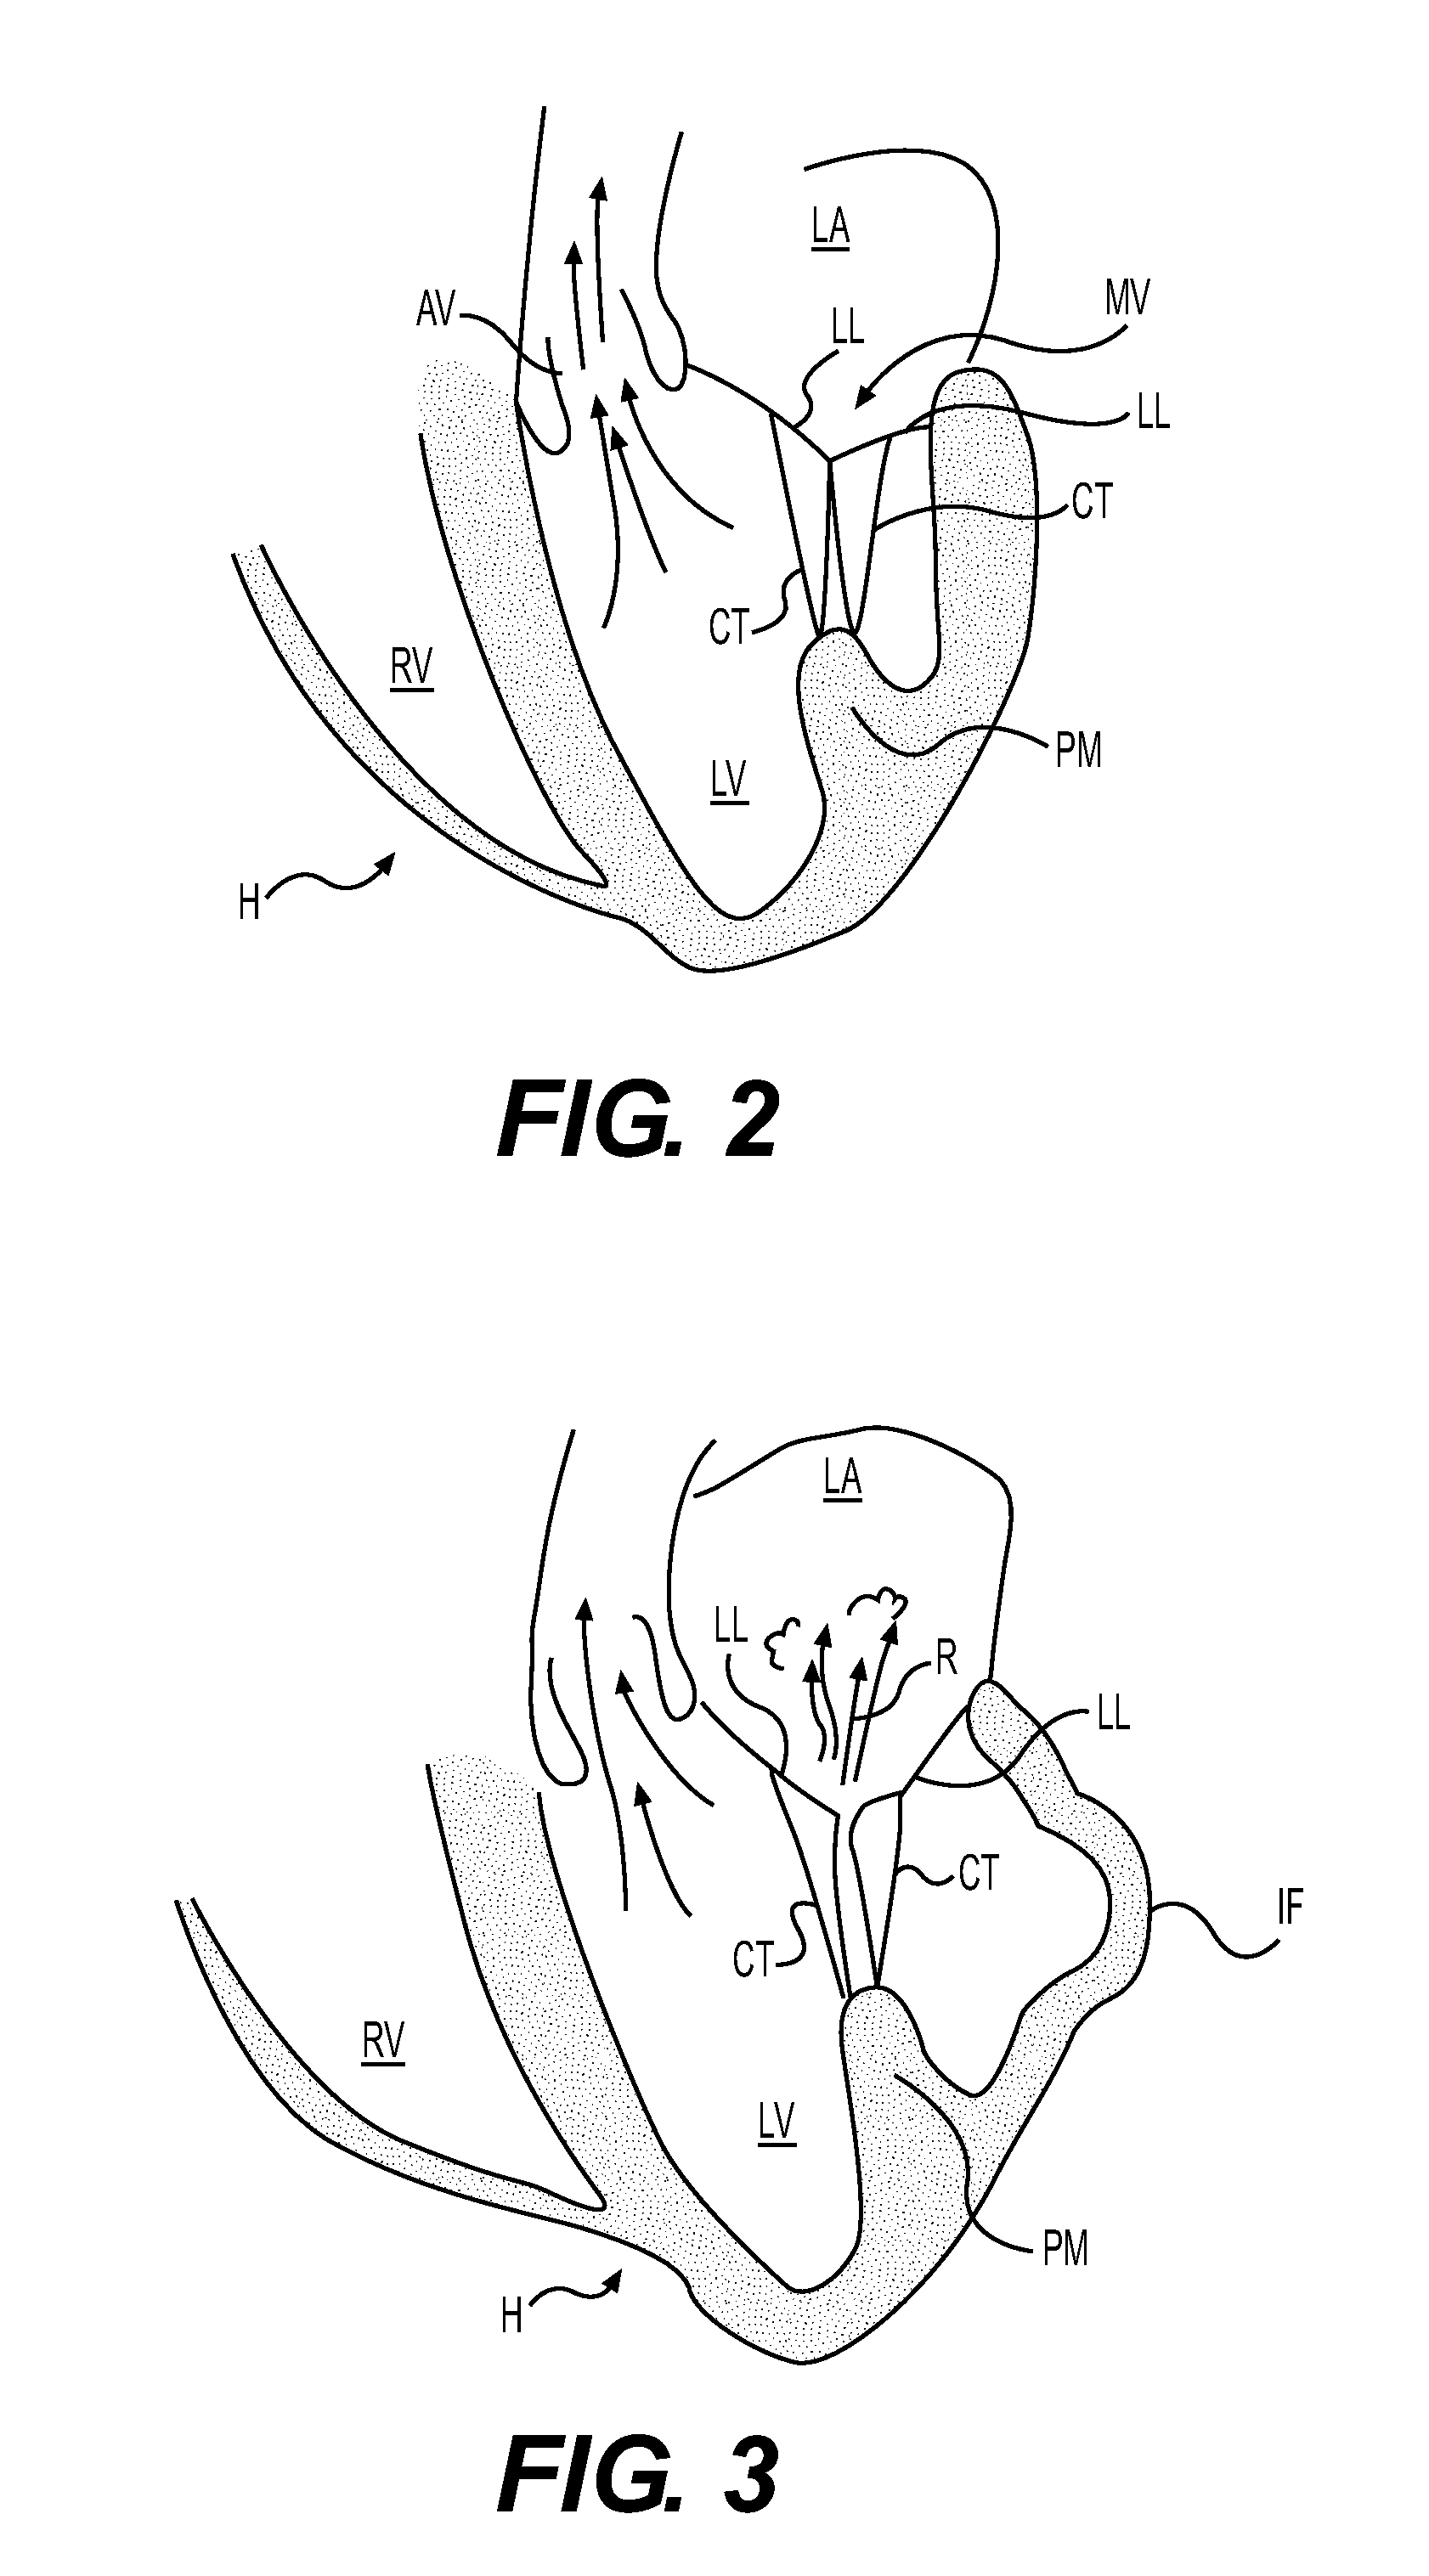 Devices and Methods for Treating a Heart